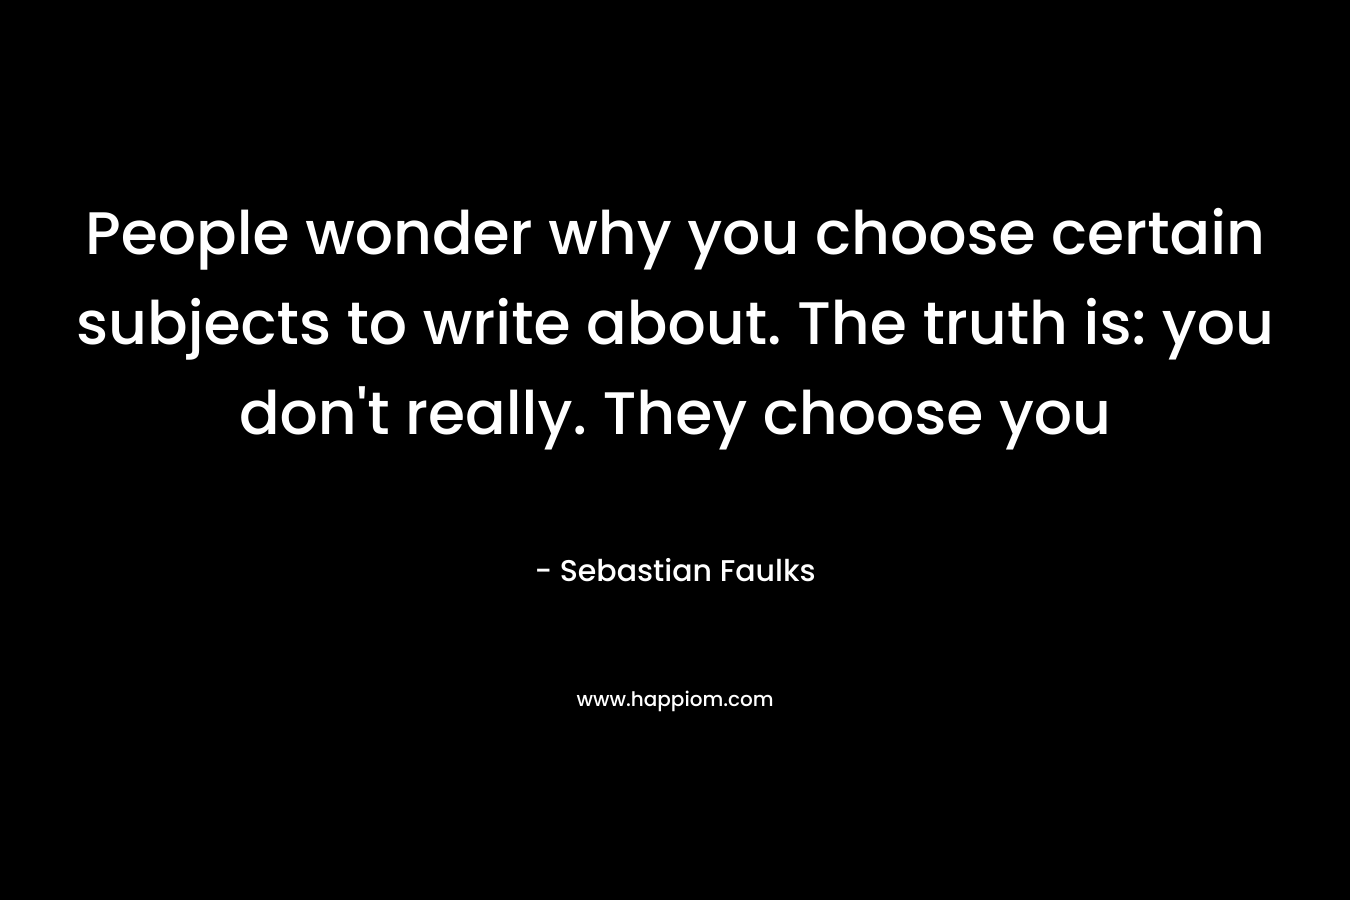 People wonder why you choose certain subjects to write about. The truth is: you don’t really. They choose you – Sebastian Faulks